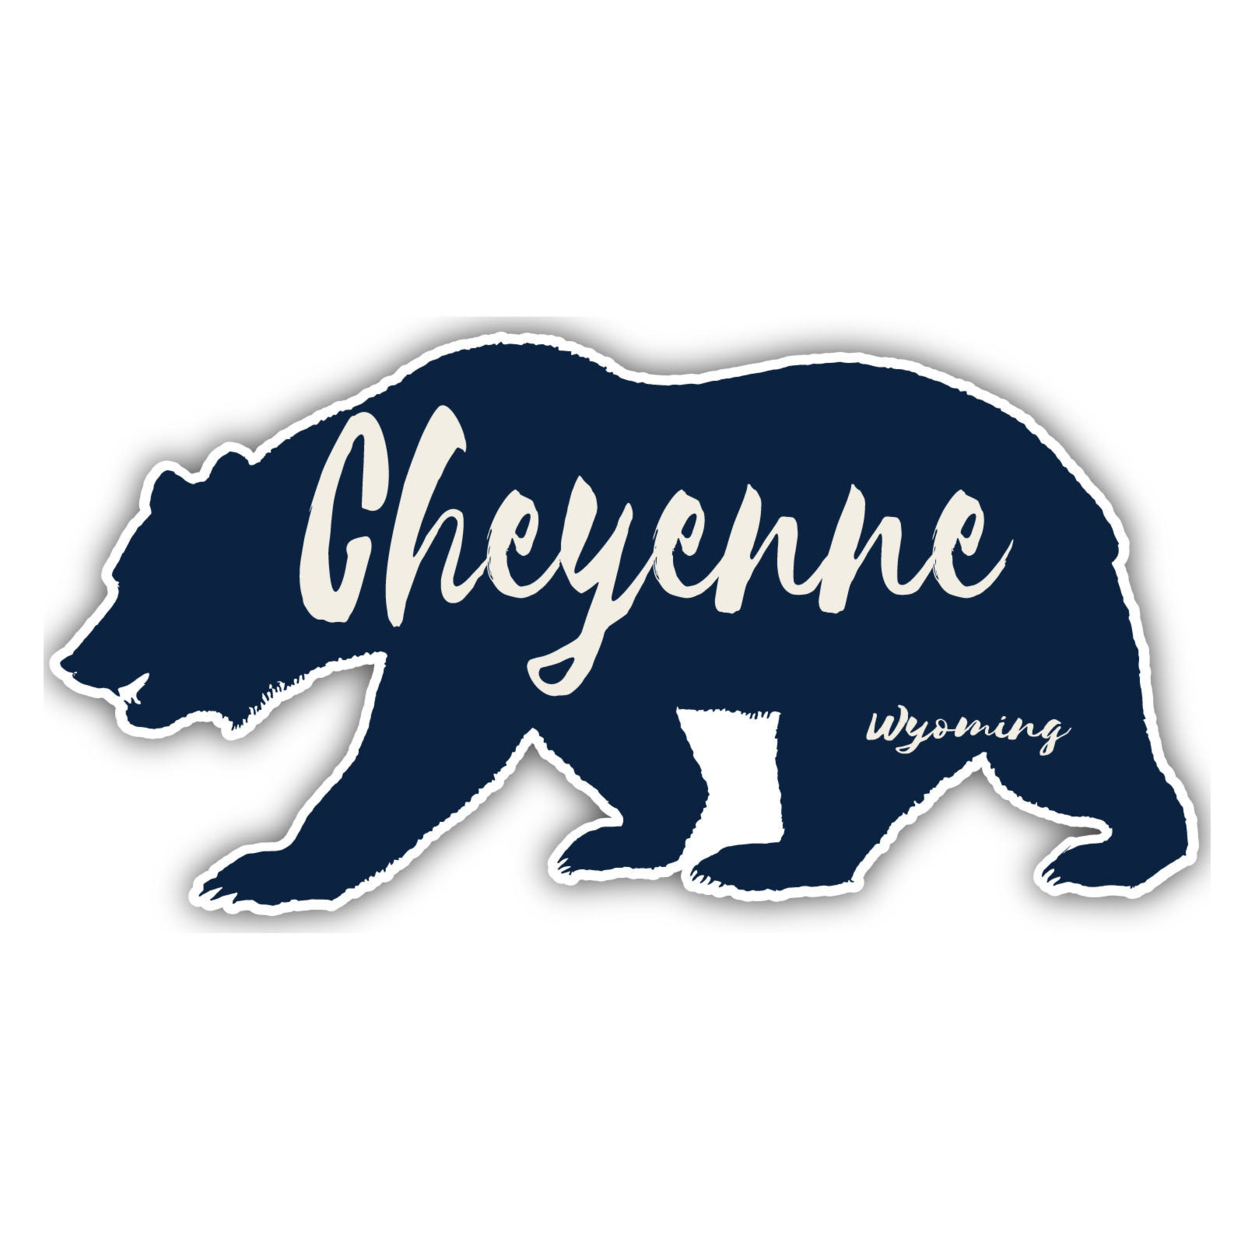 Cheyenne Wyoming Souvenir Decorative Stickers (Choose Theme And Size) - Single Unit, 6-Inch, Tent